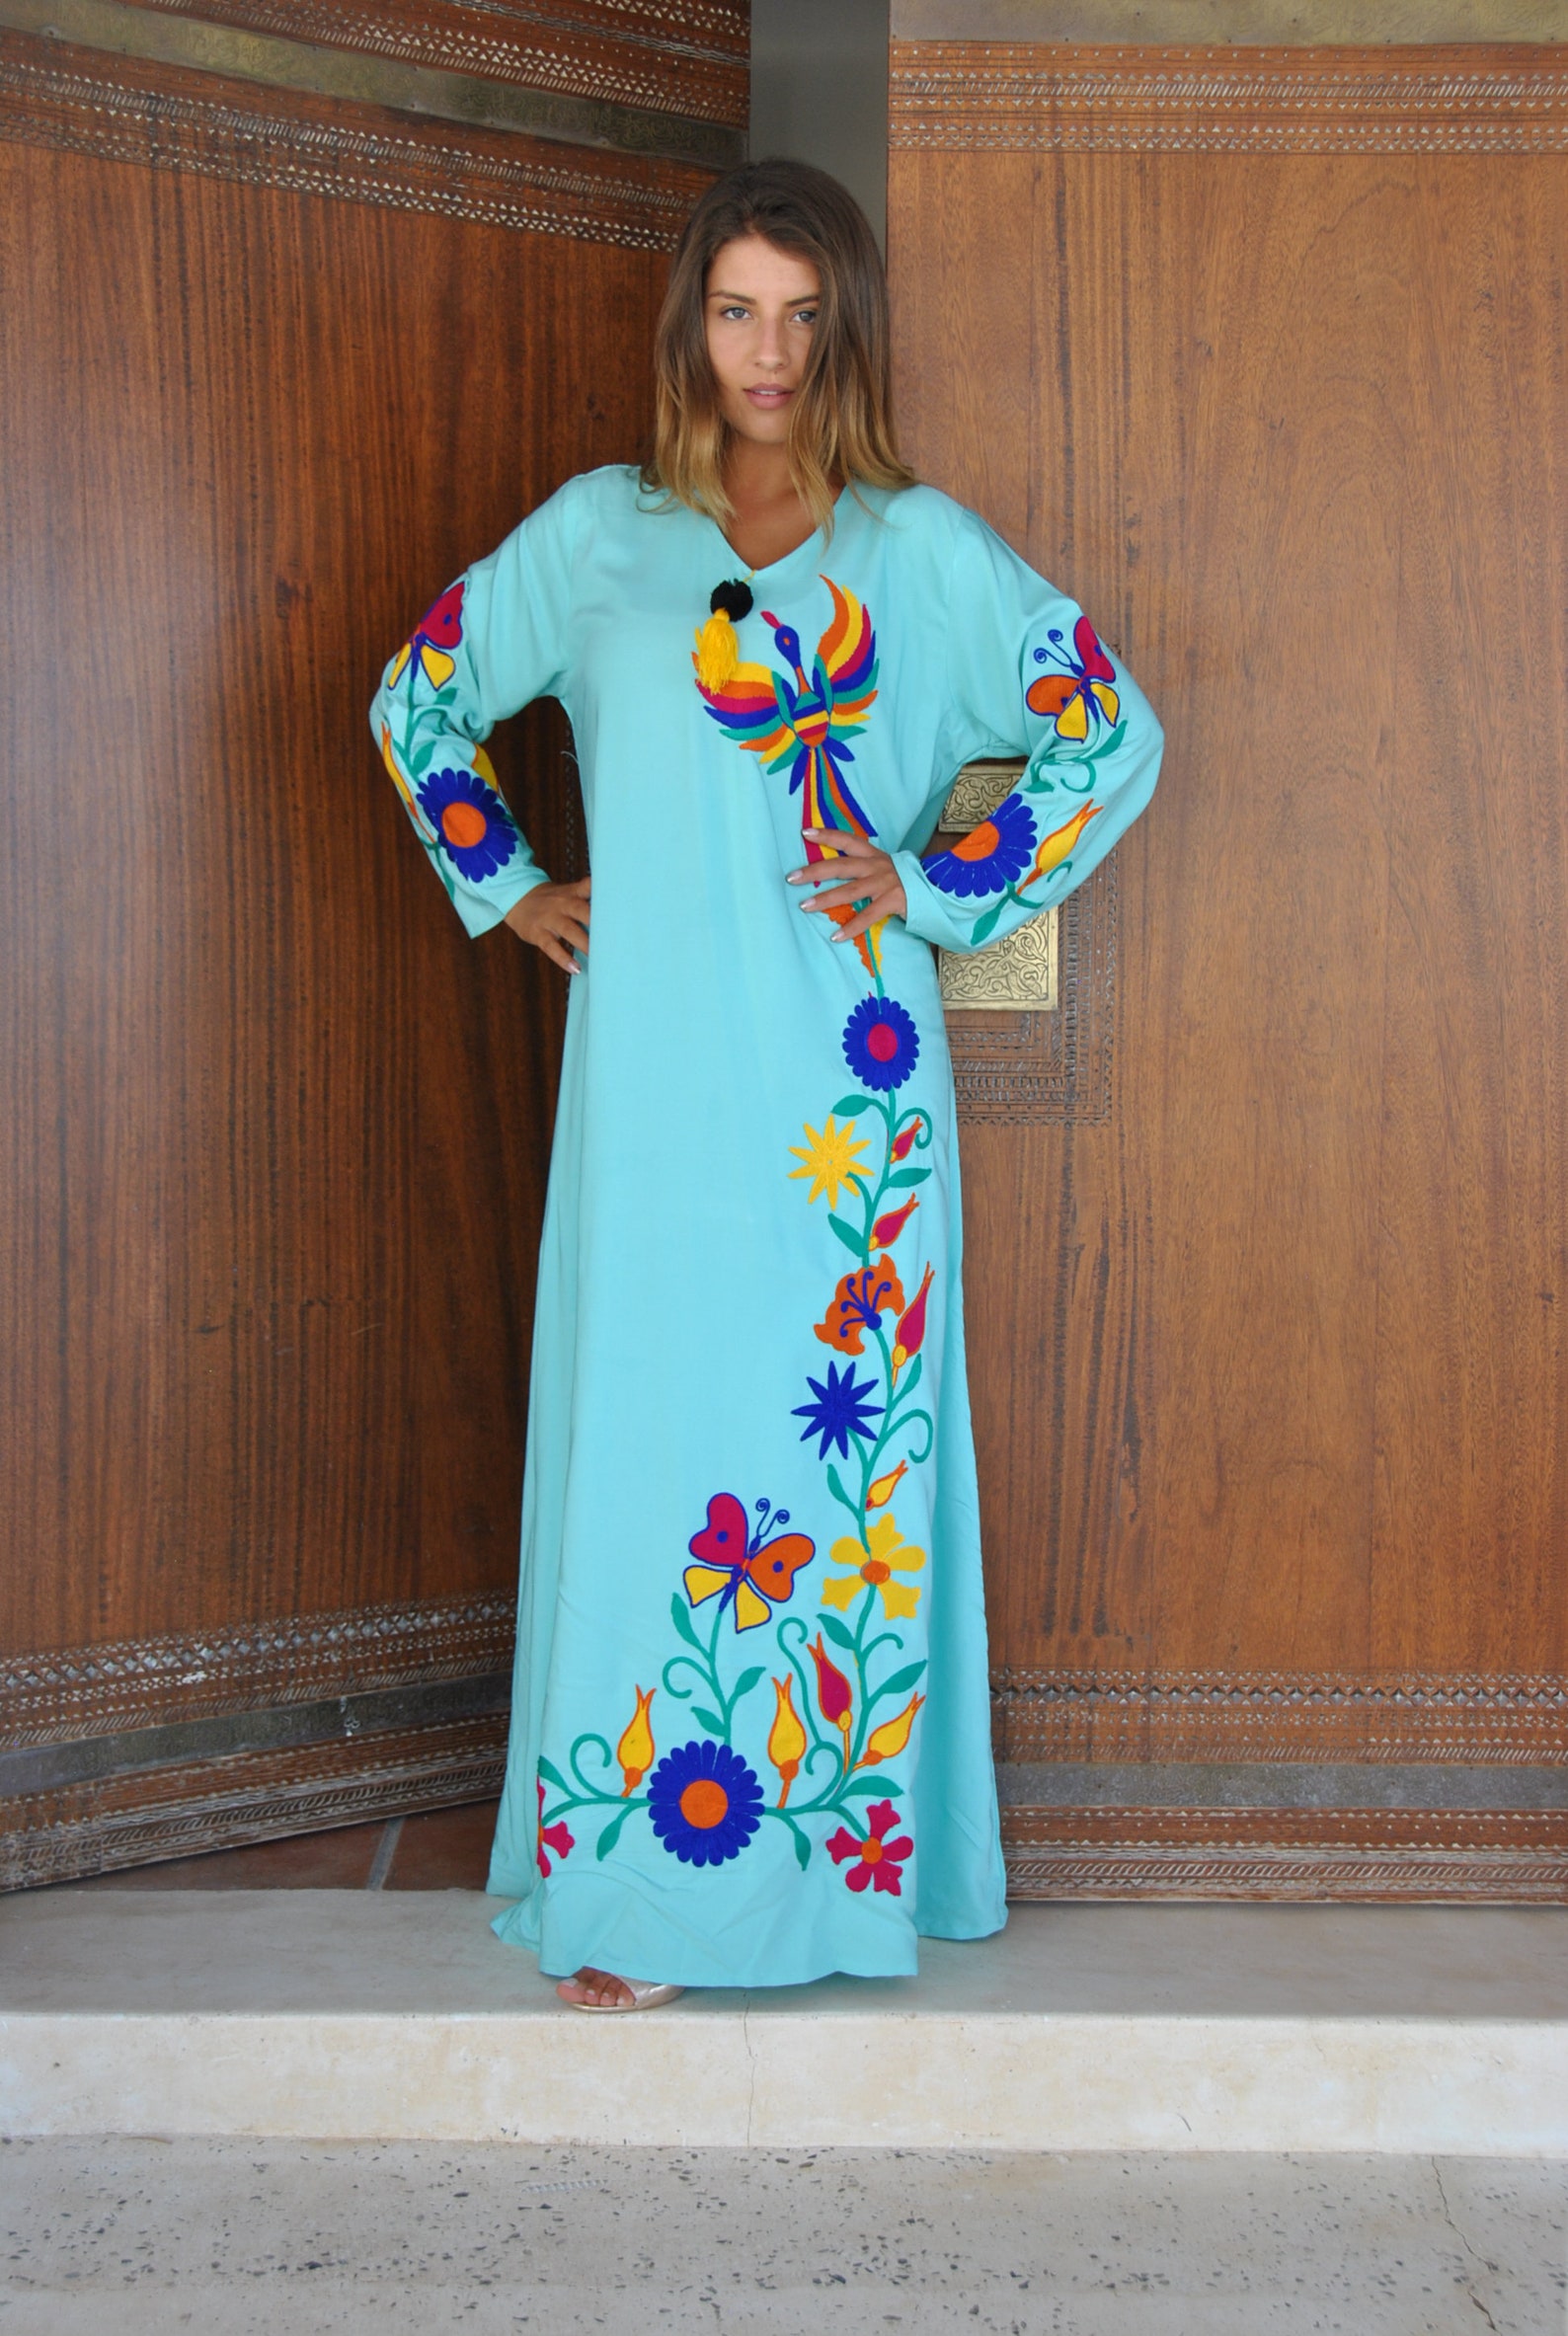 Turquoise peacock embroidered Caftan caftans for women | Etsy